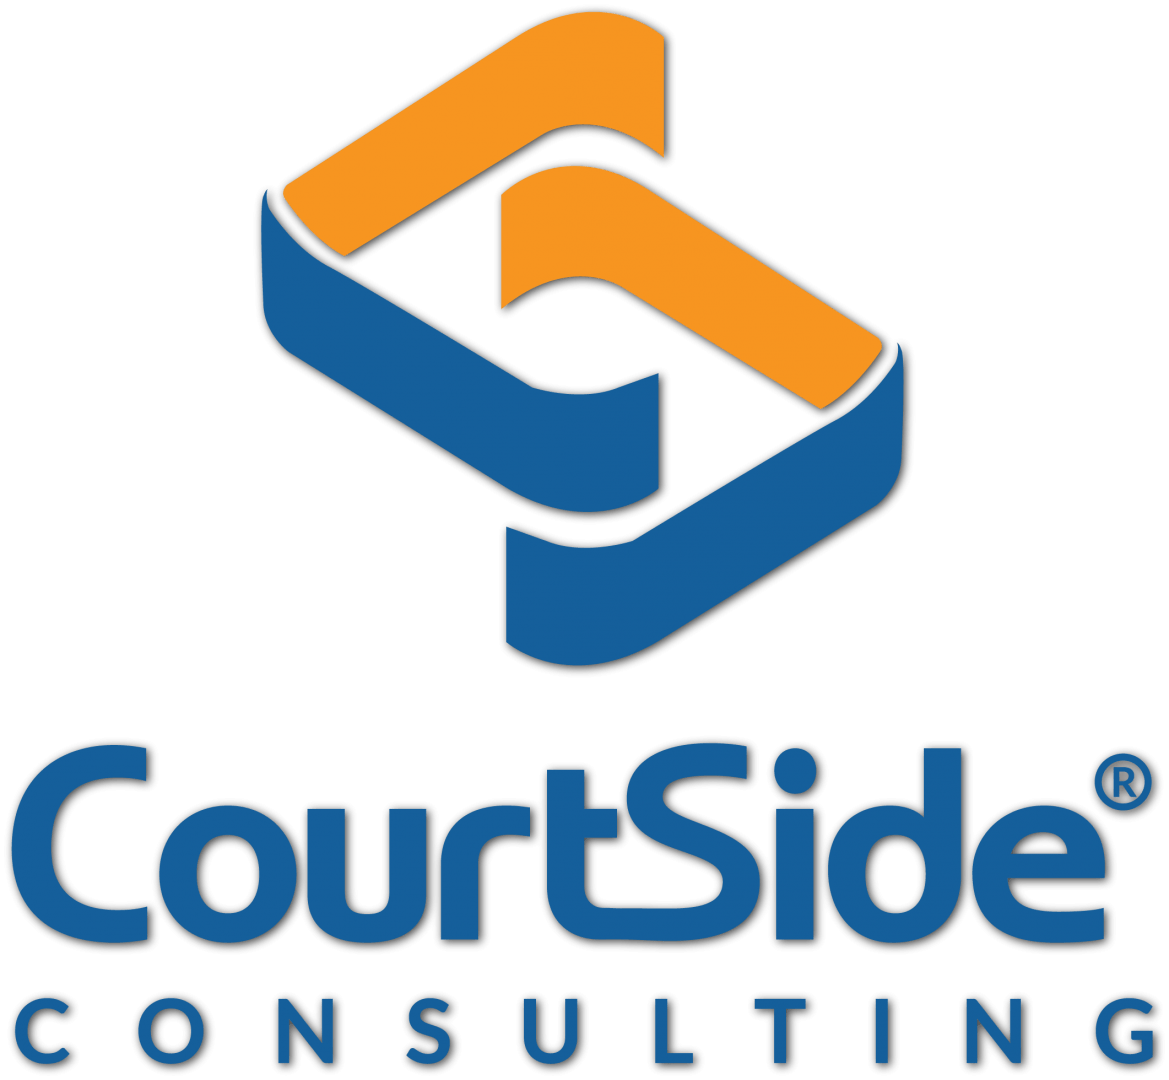 Contact CourtSide Consulting today to learn how we can benefit your business.